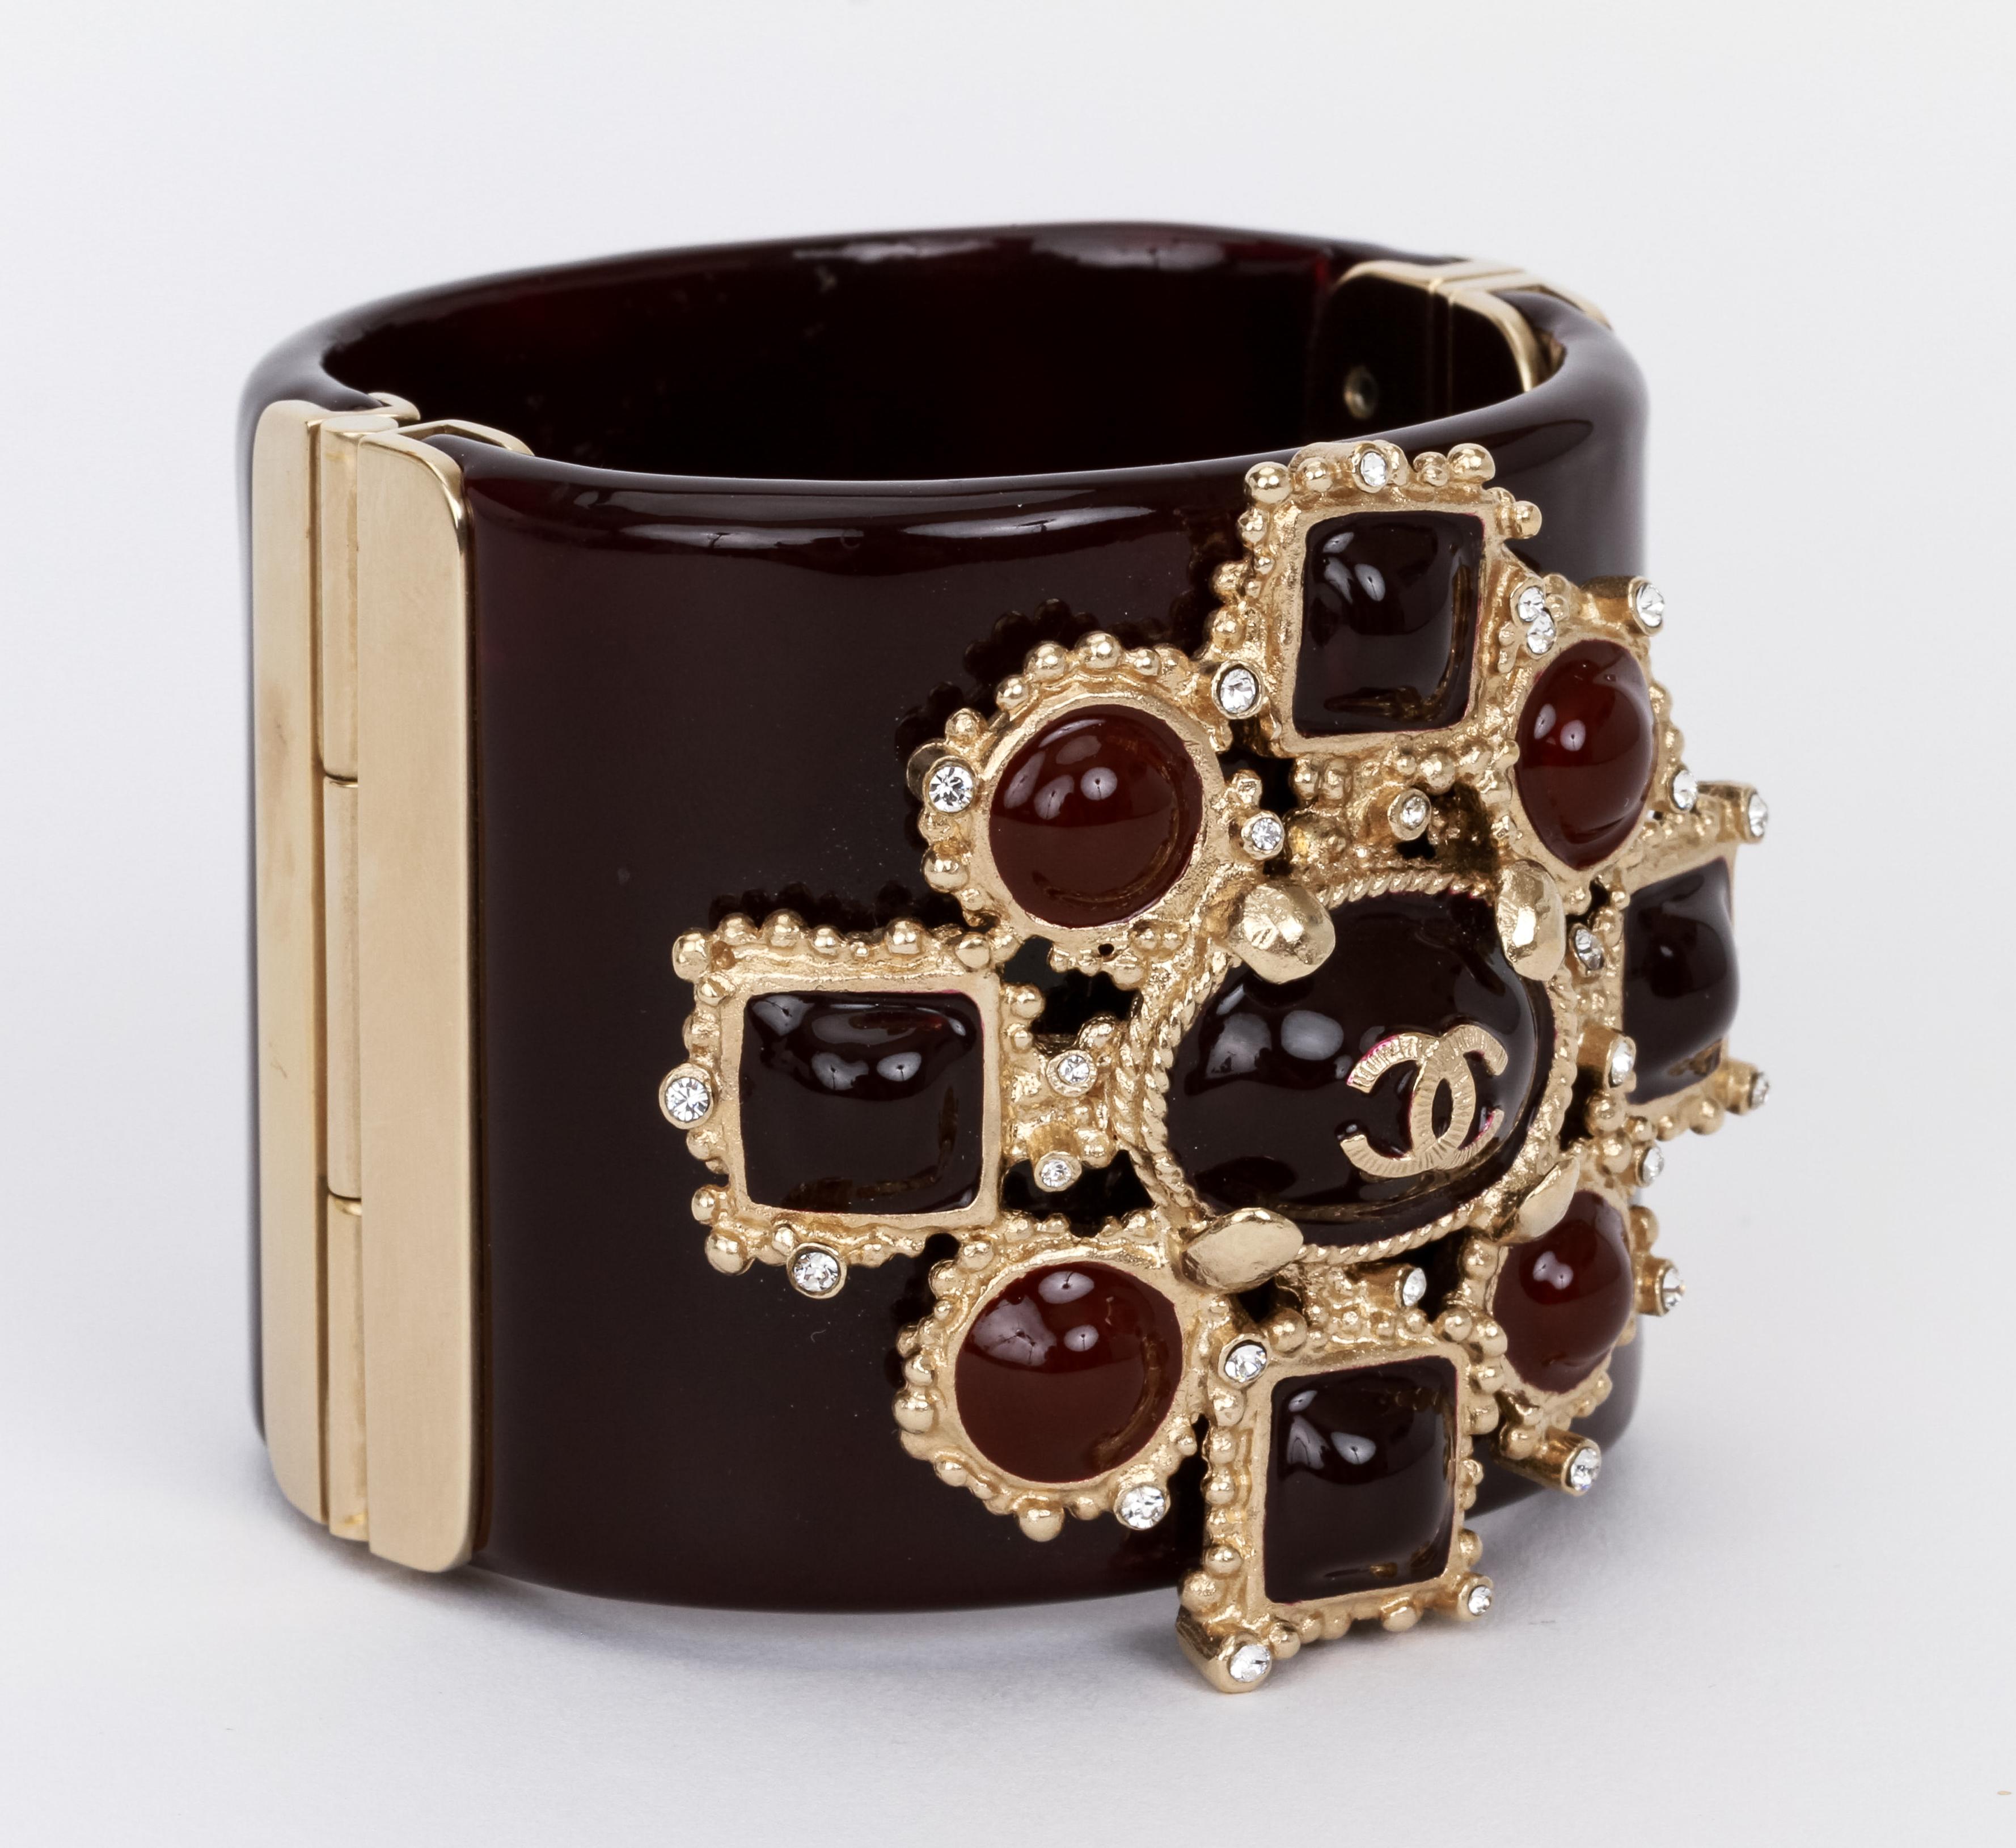 Chanel large cuff maltese cross with gripoix. The epitome of chic in maroon, brown, and burgundy tones. Original pouch and box.